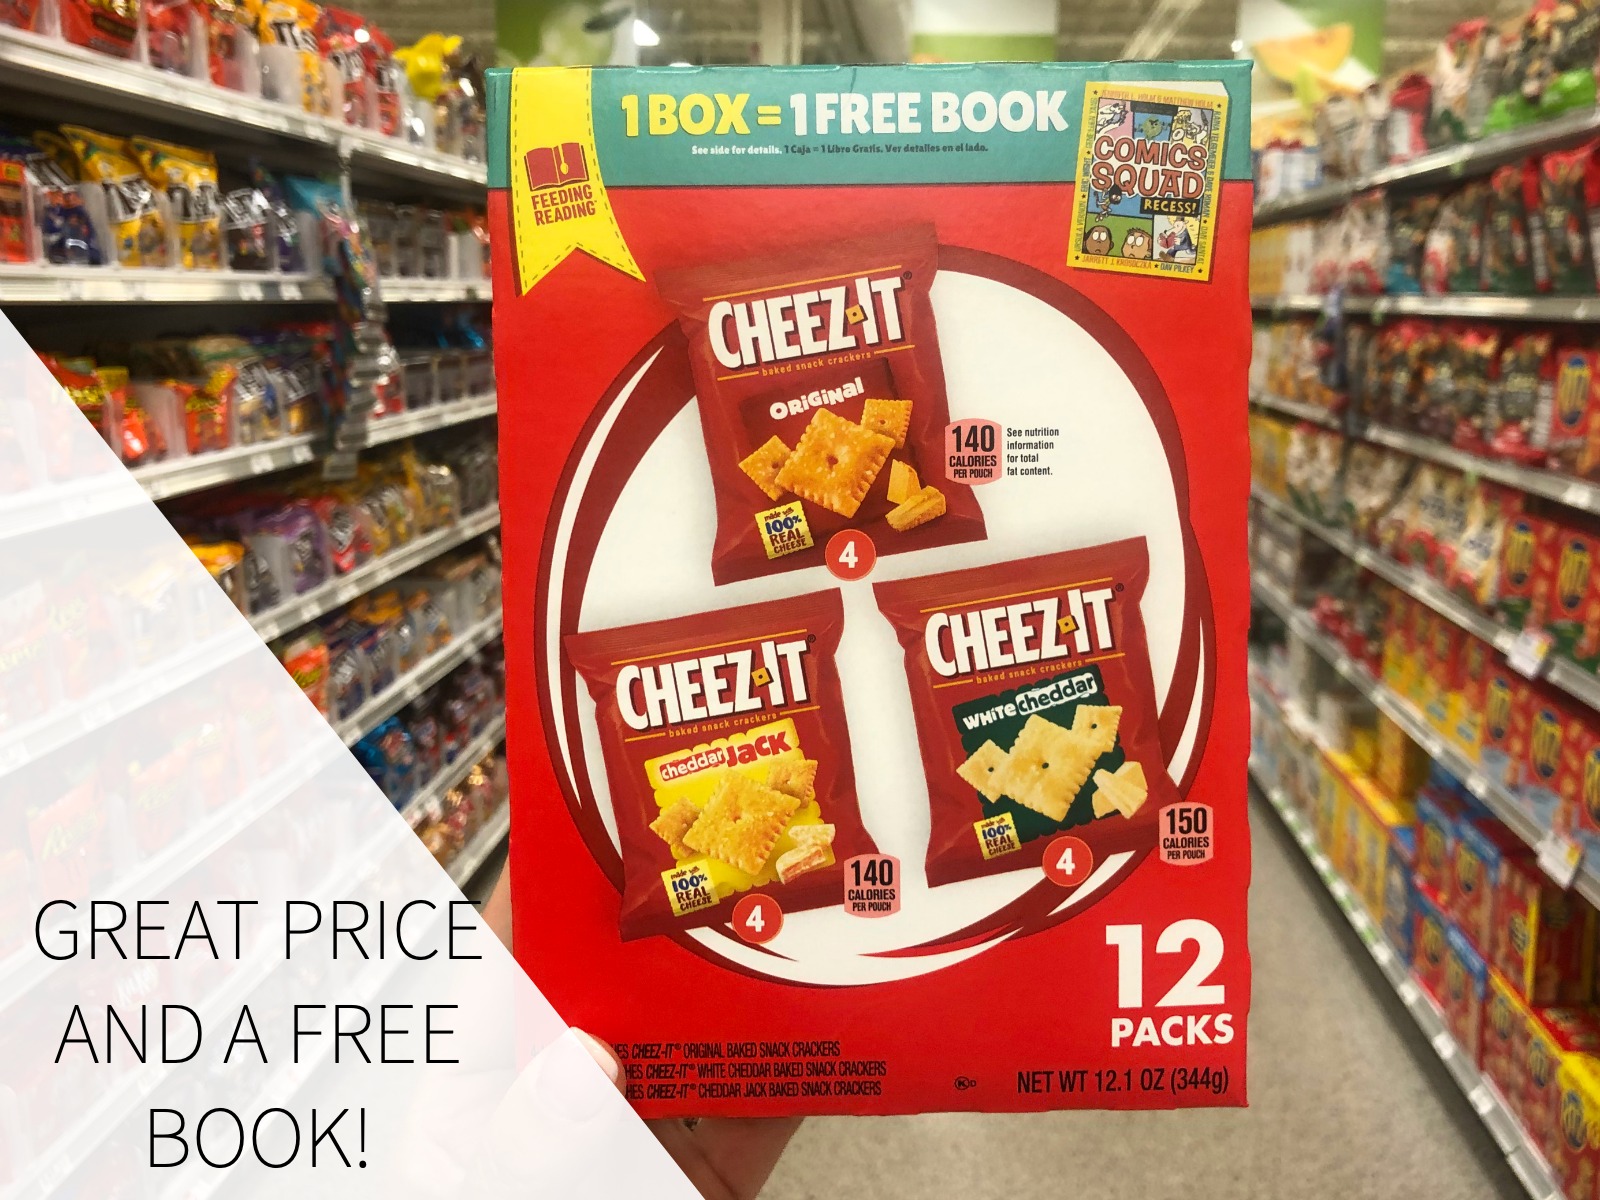 Earn Free Books With The Kellogg’s Feeding Reading Program – Great Week To Earn With The Sales At Publix!